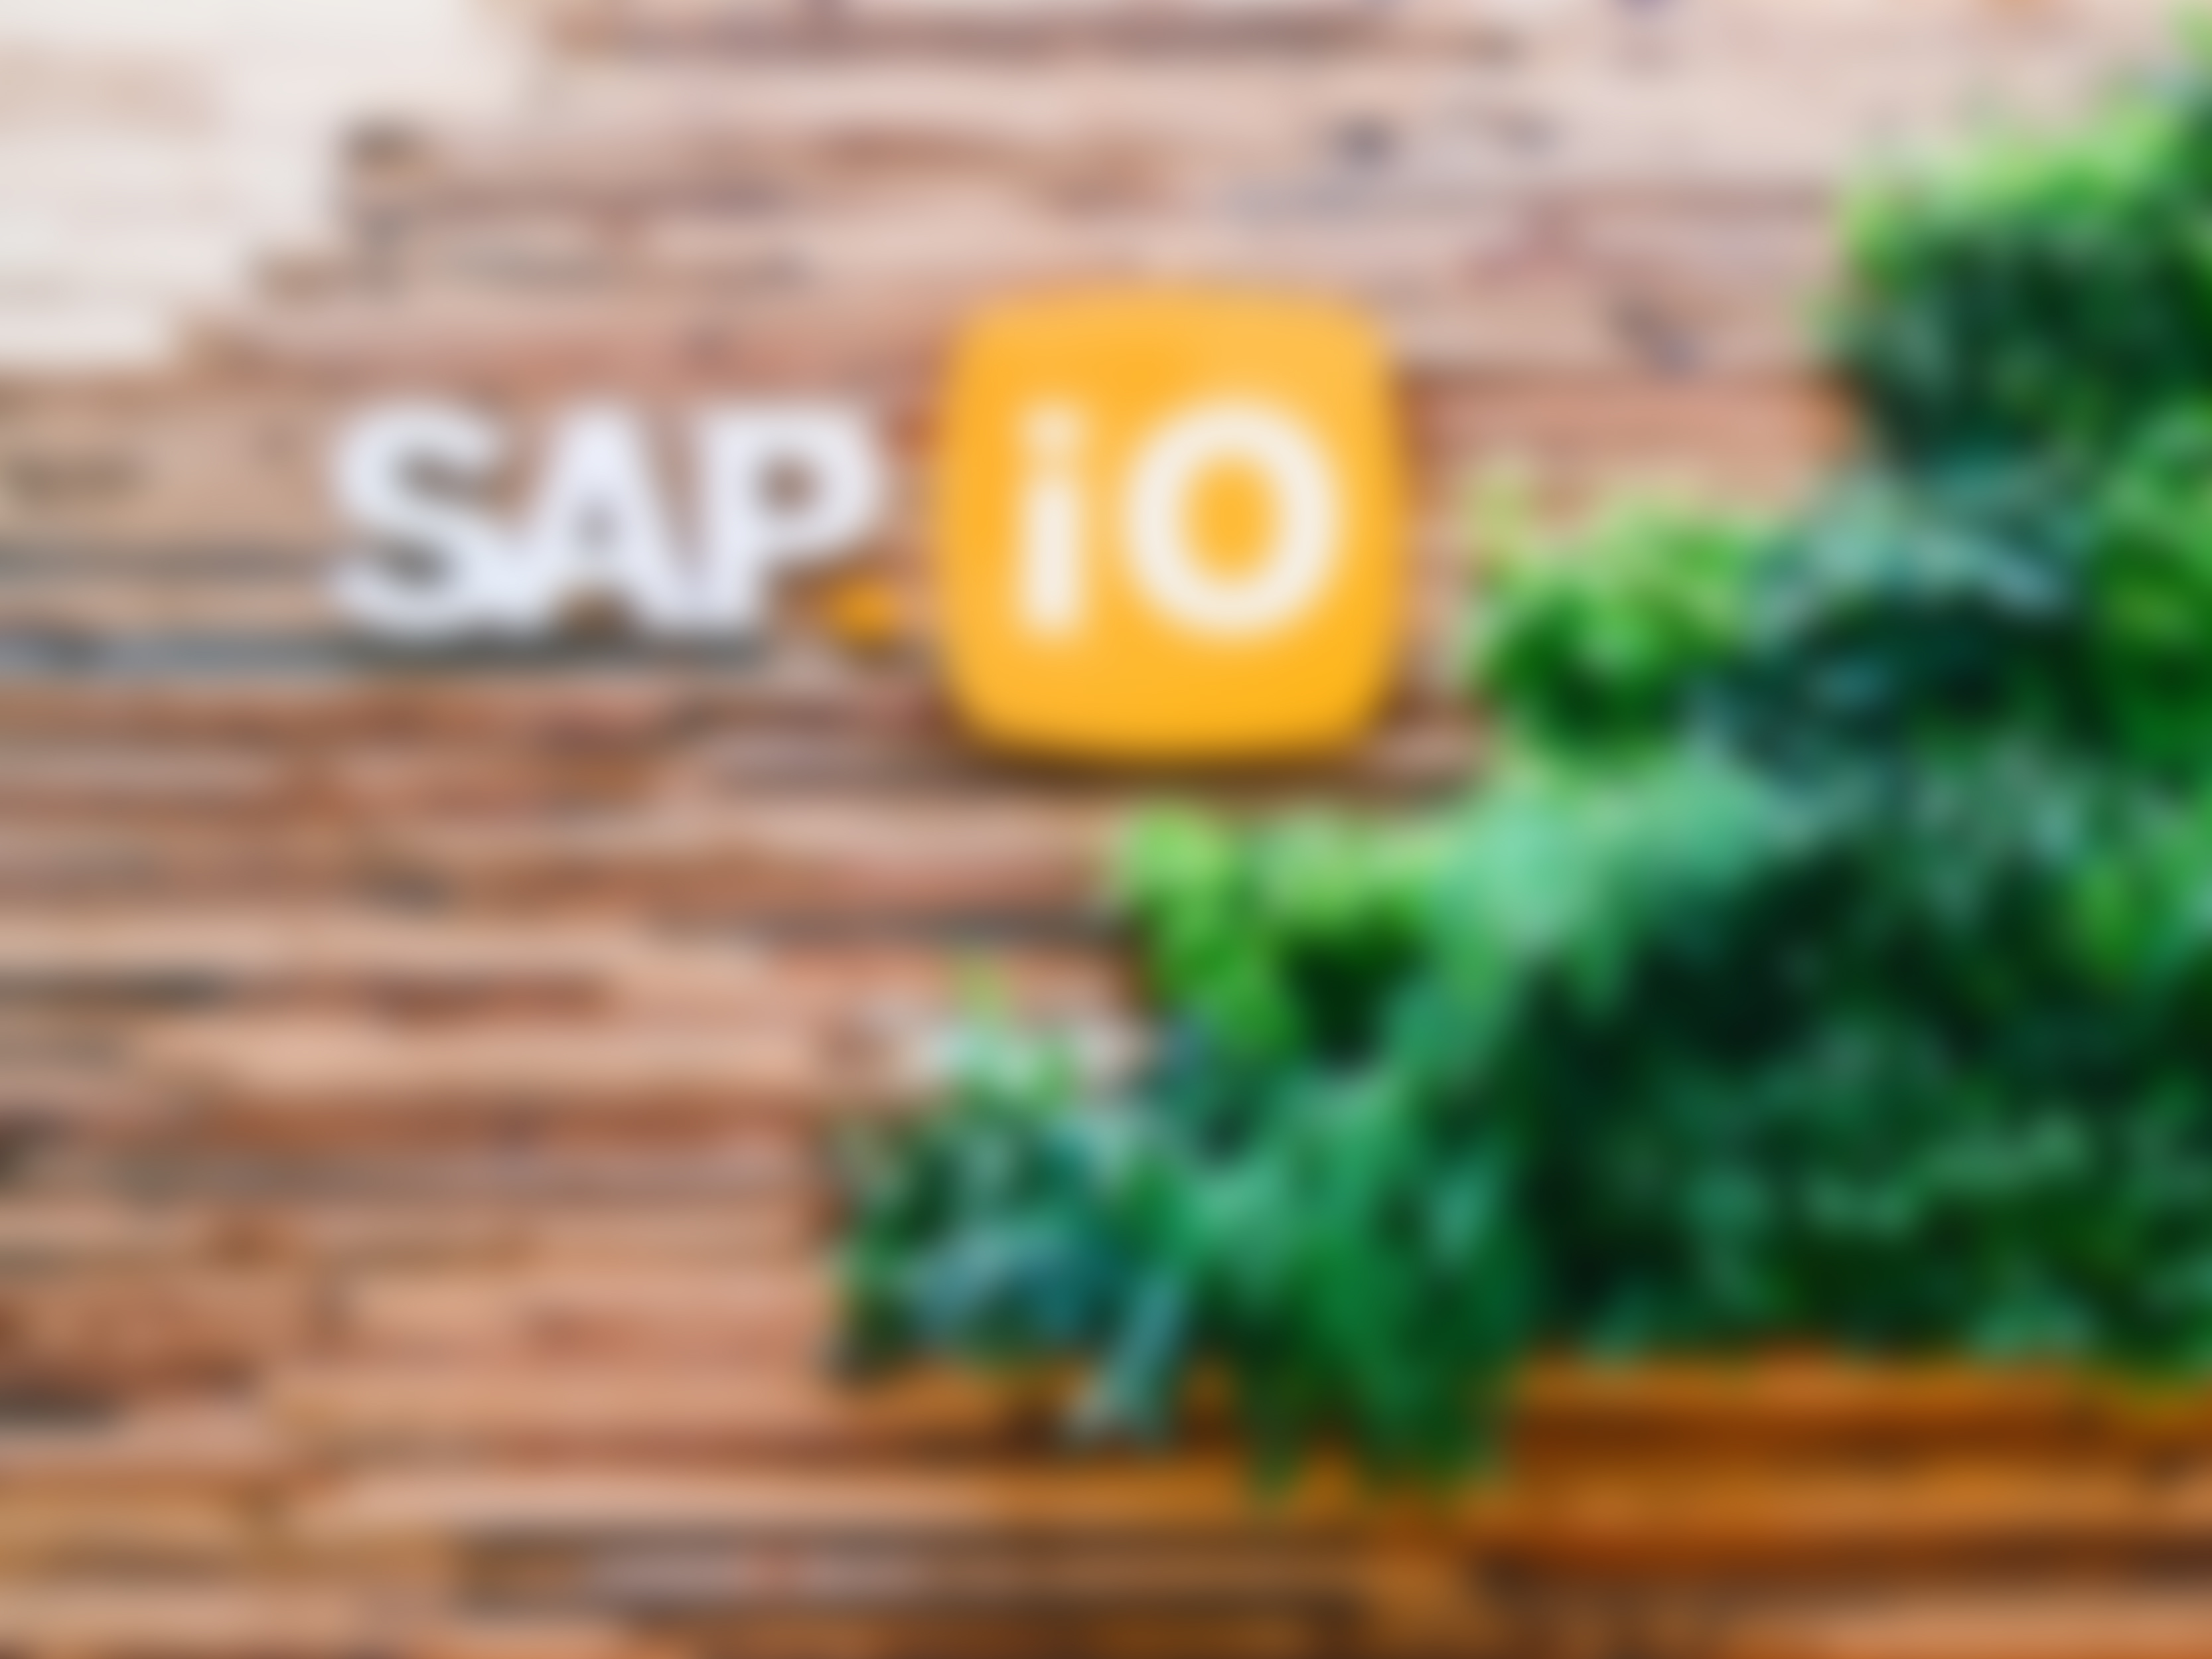 SAP To Launch Tel Aviv Accelerator For Early-Stage, Deep Tech Startups